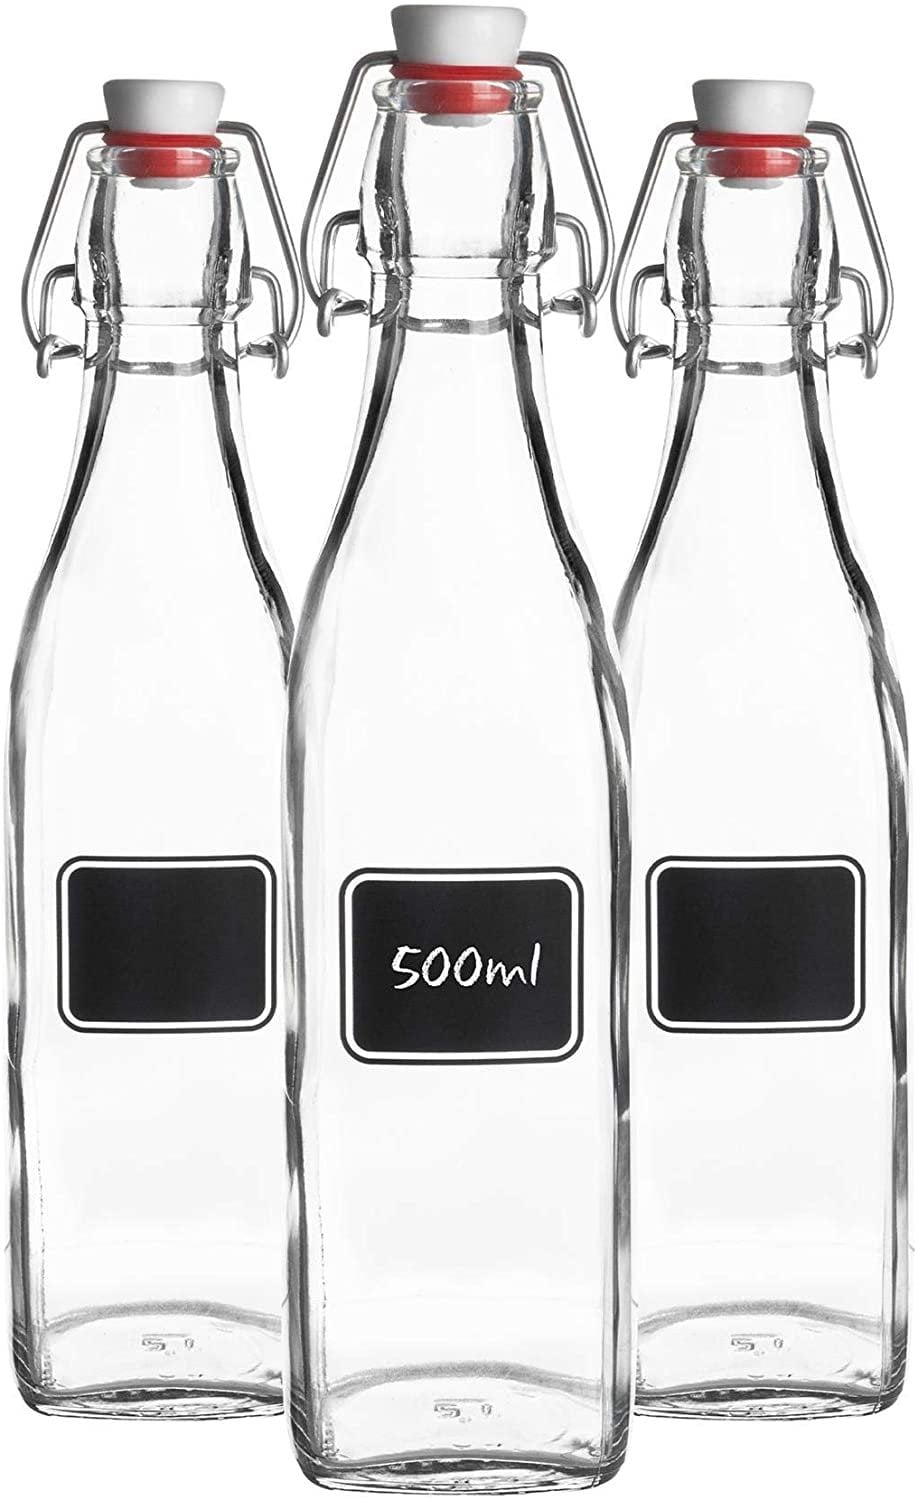 500ml Bormioli Rocco 6pc Lavagna Glass Swing Top Bottle Set with Chalkboard Label For Preserving Home Brew 